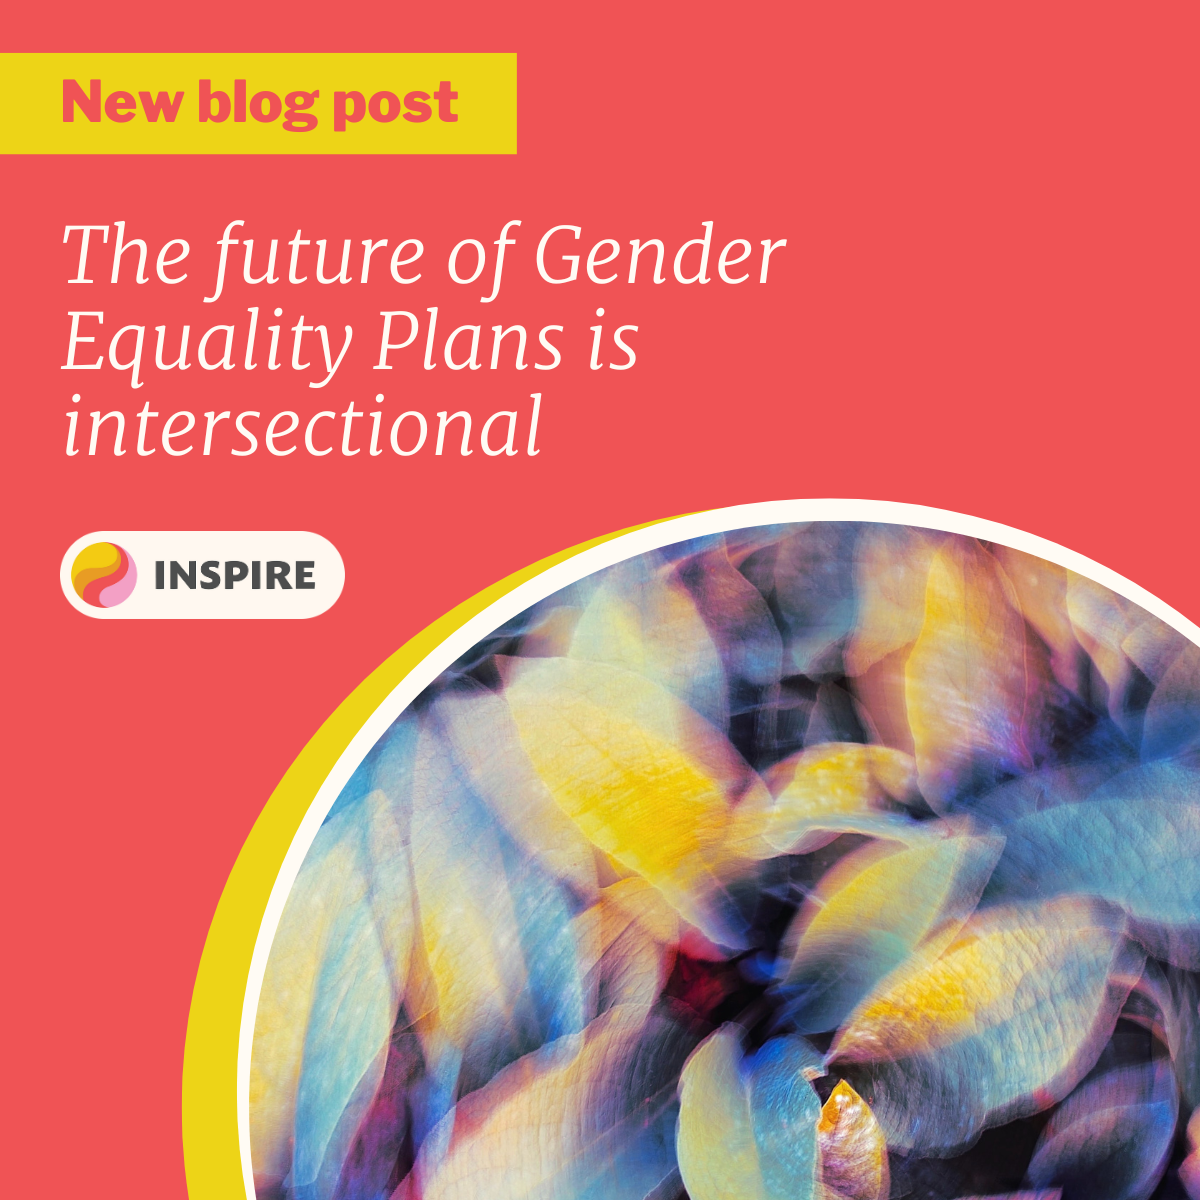 the future is intersectional